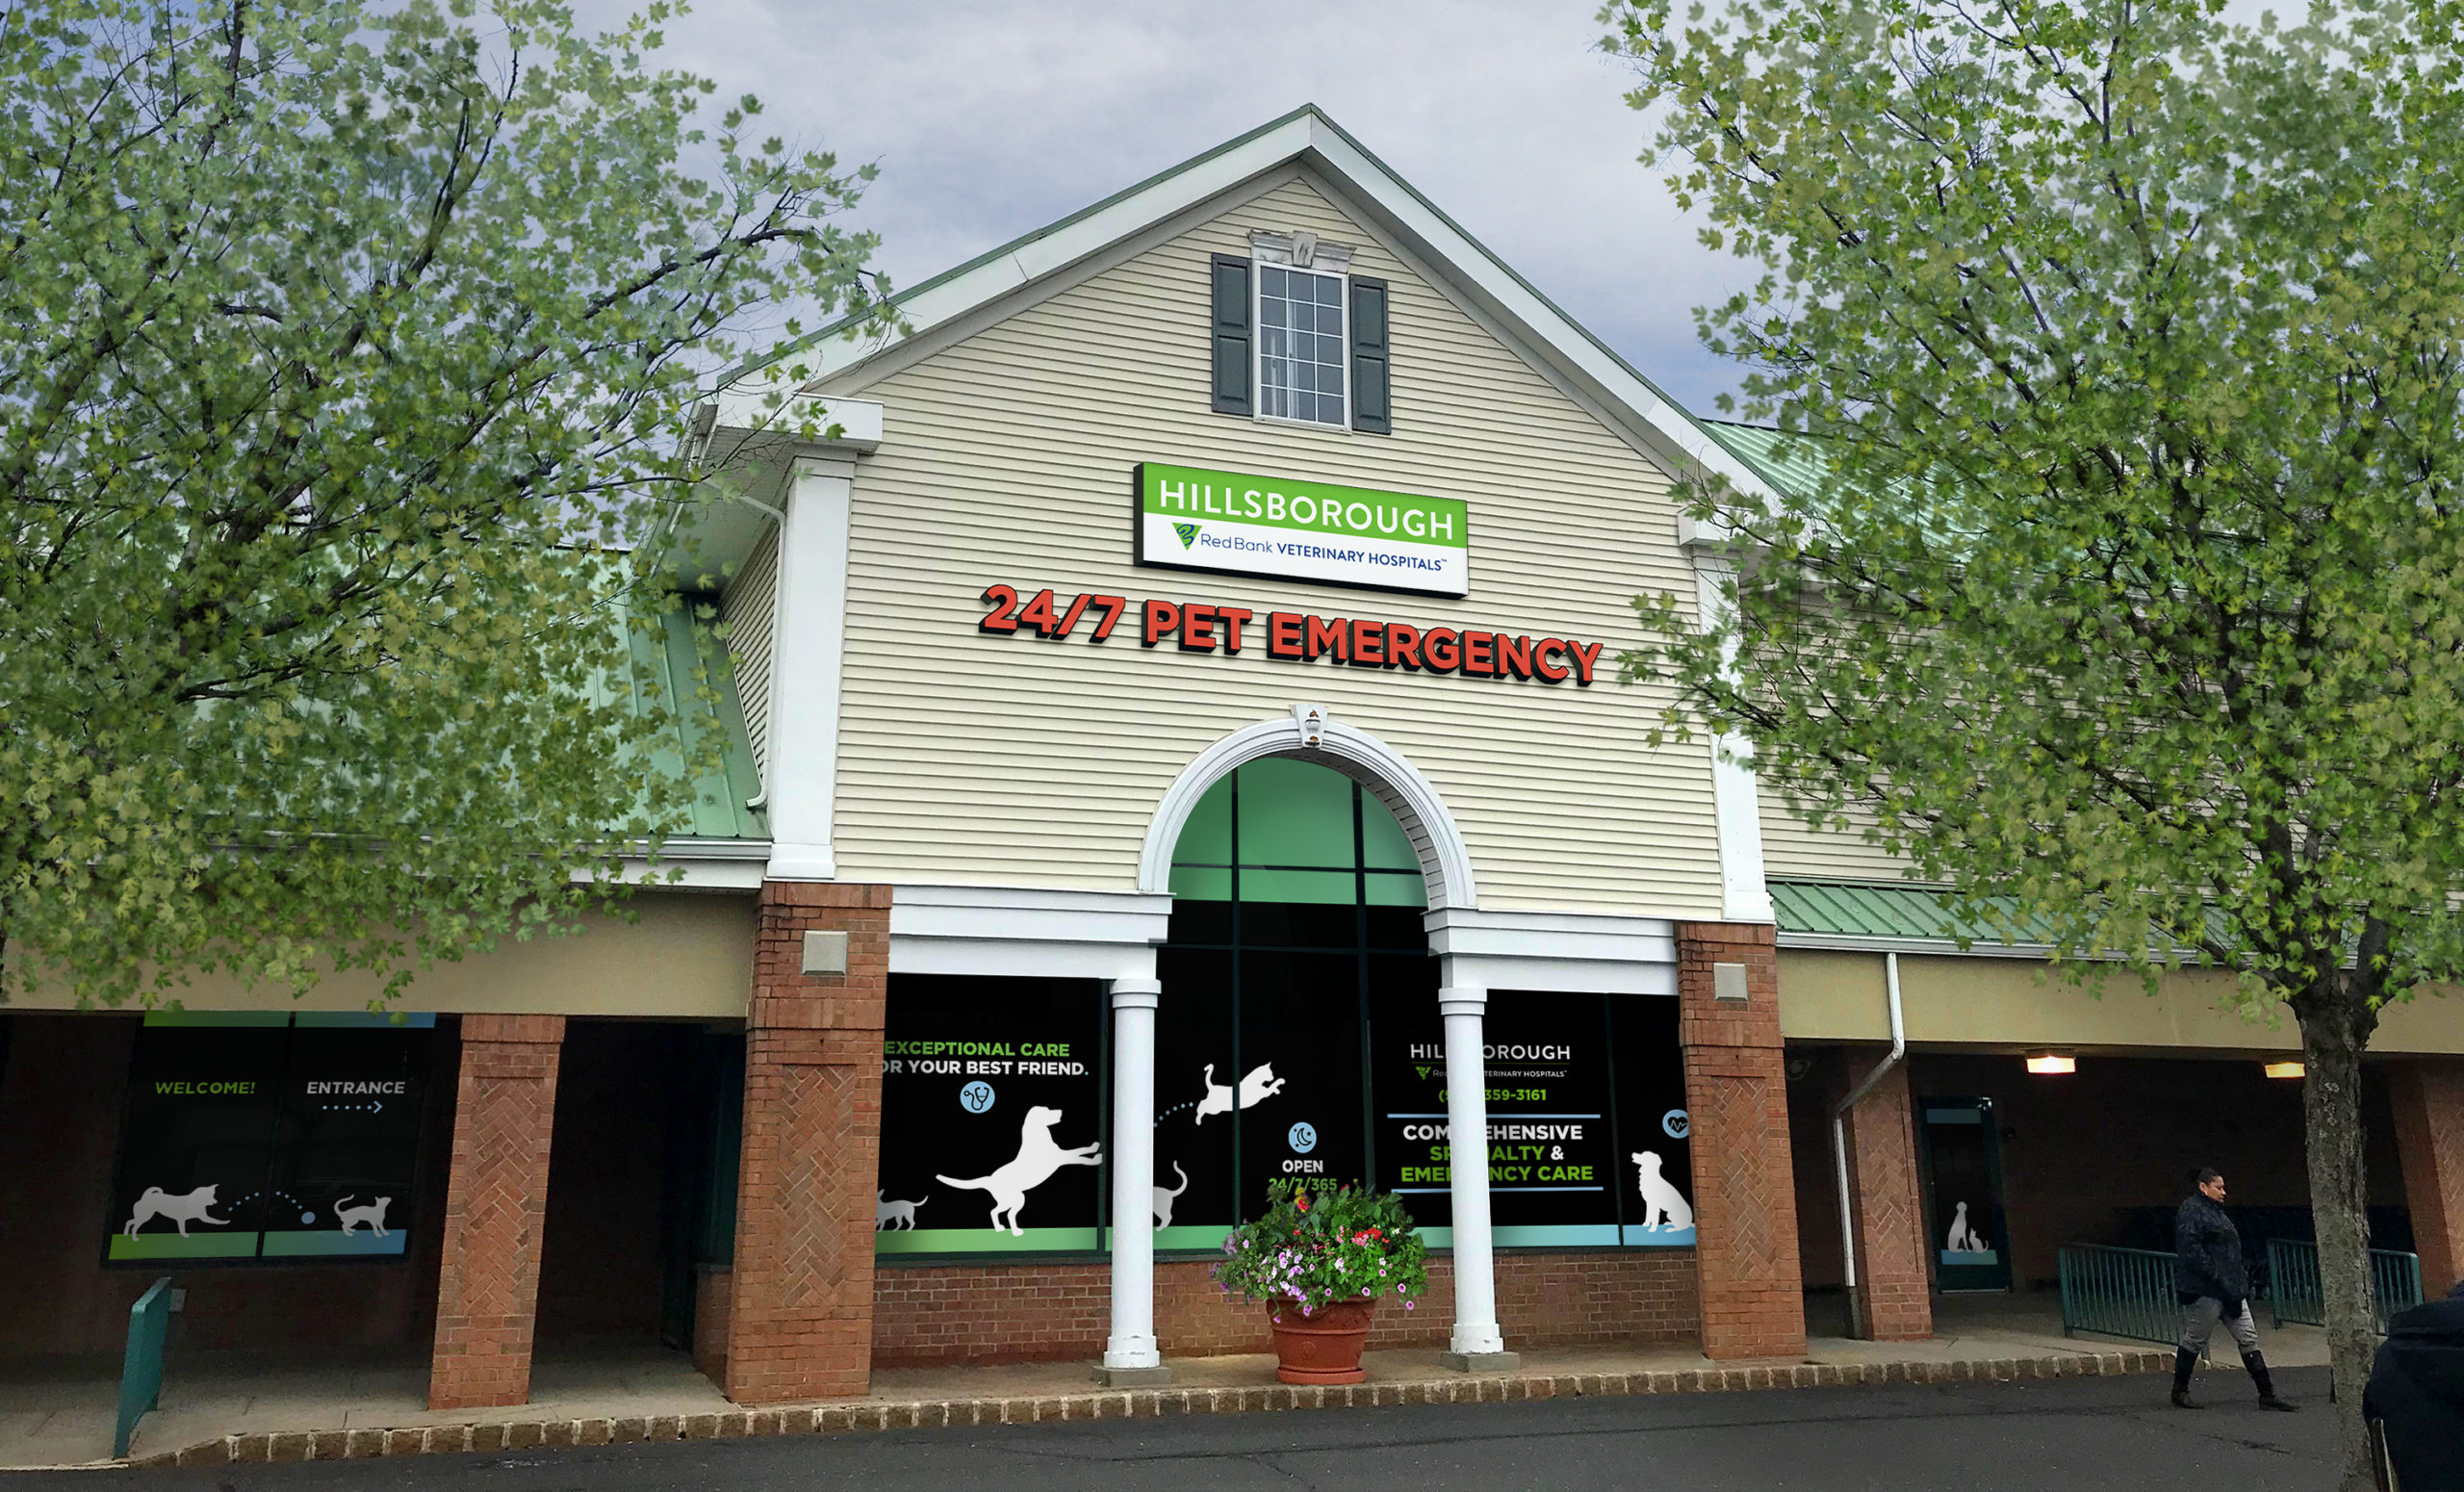 Red Bank Veterinary Hospitals in Hillsborough, New Jersey